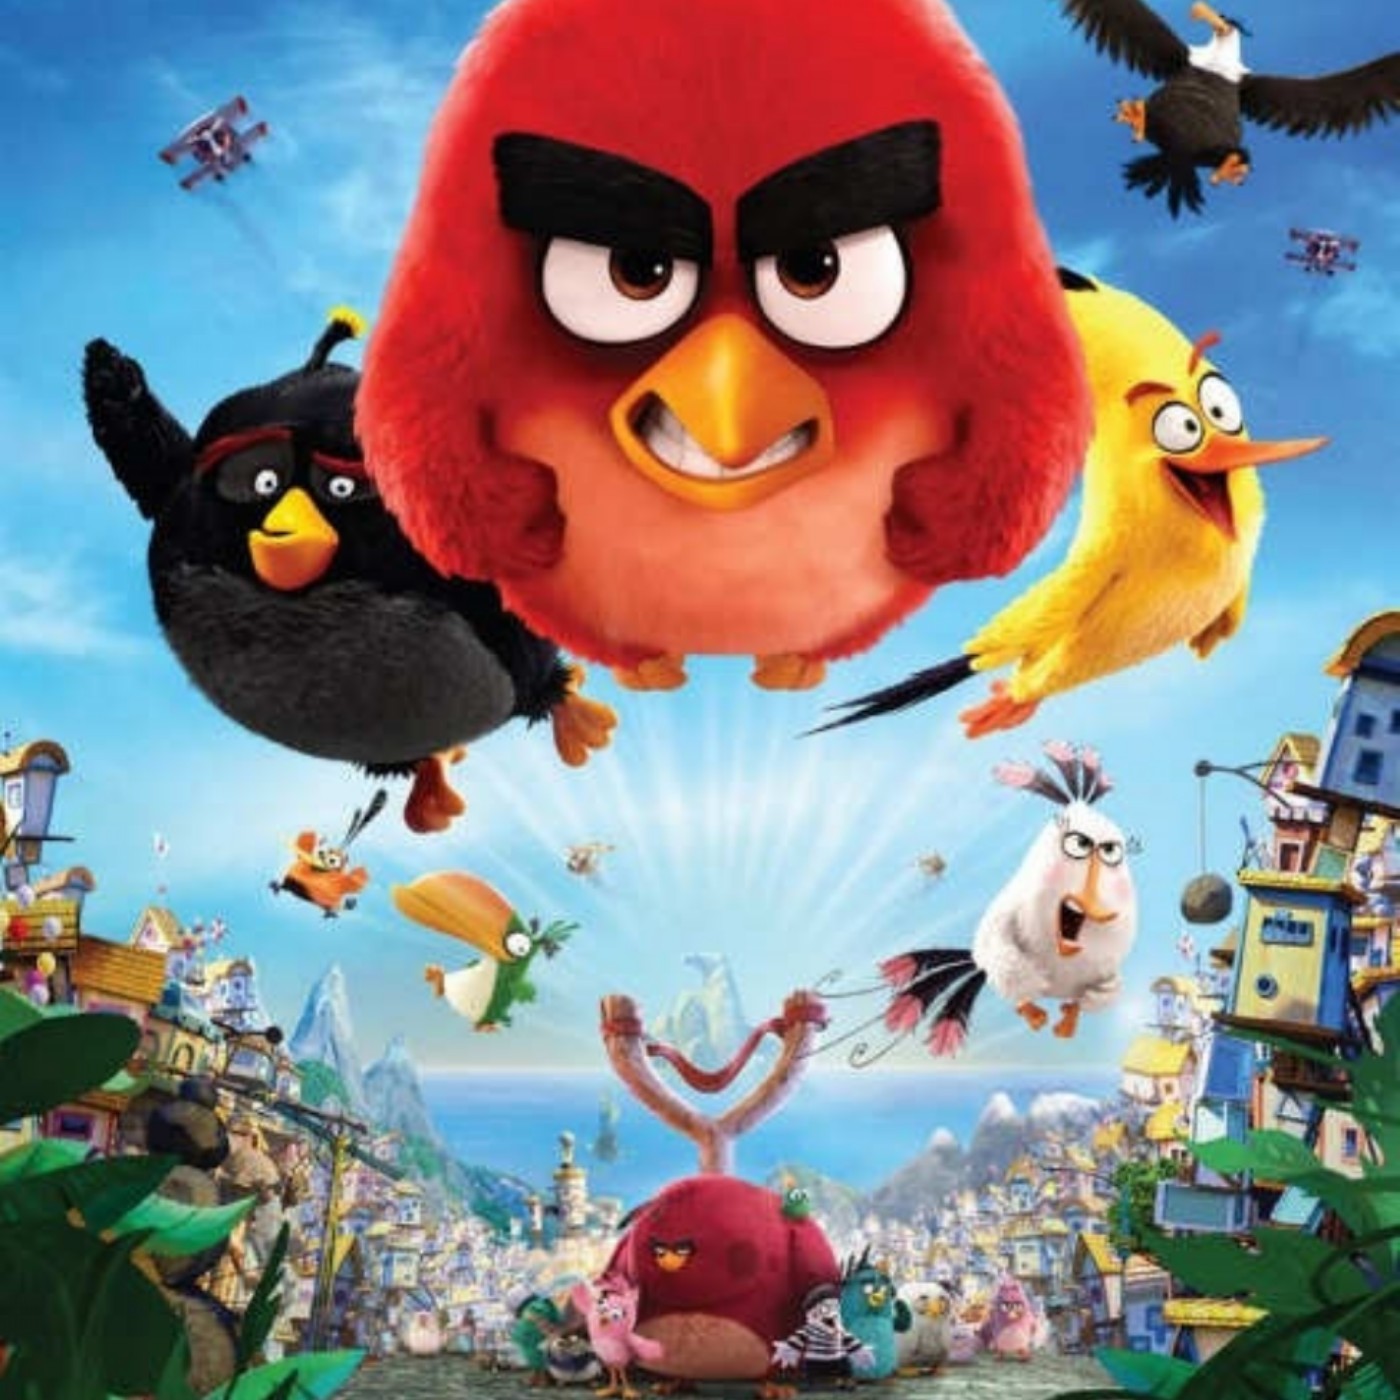 Download The Angry Birds Movie (English) In Hindi Hd | Podcast on SoundOn